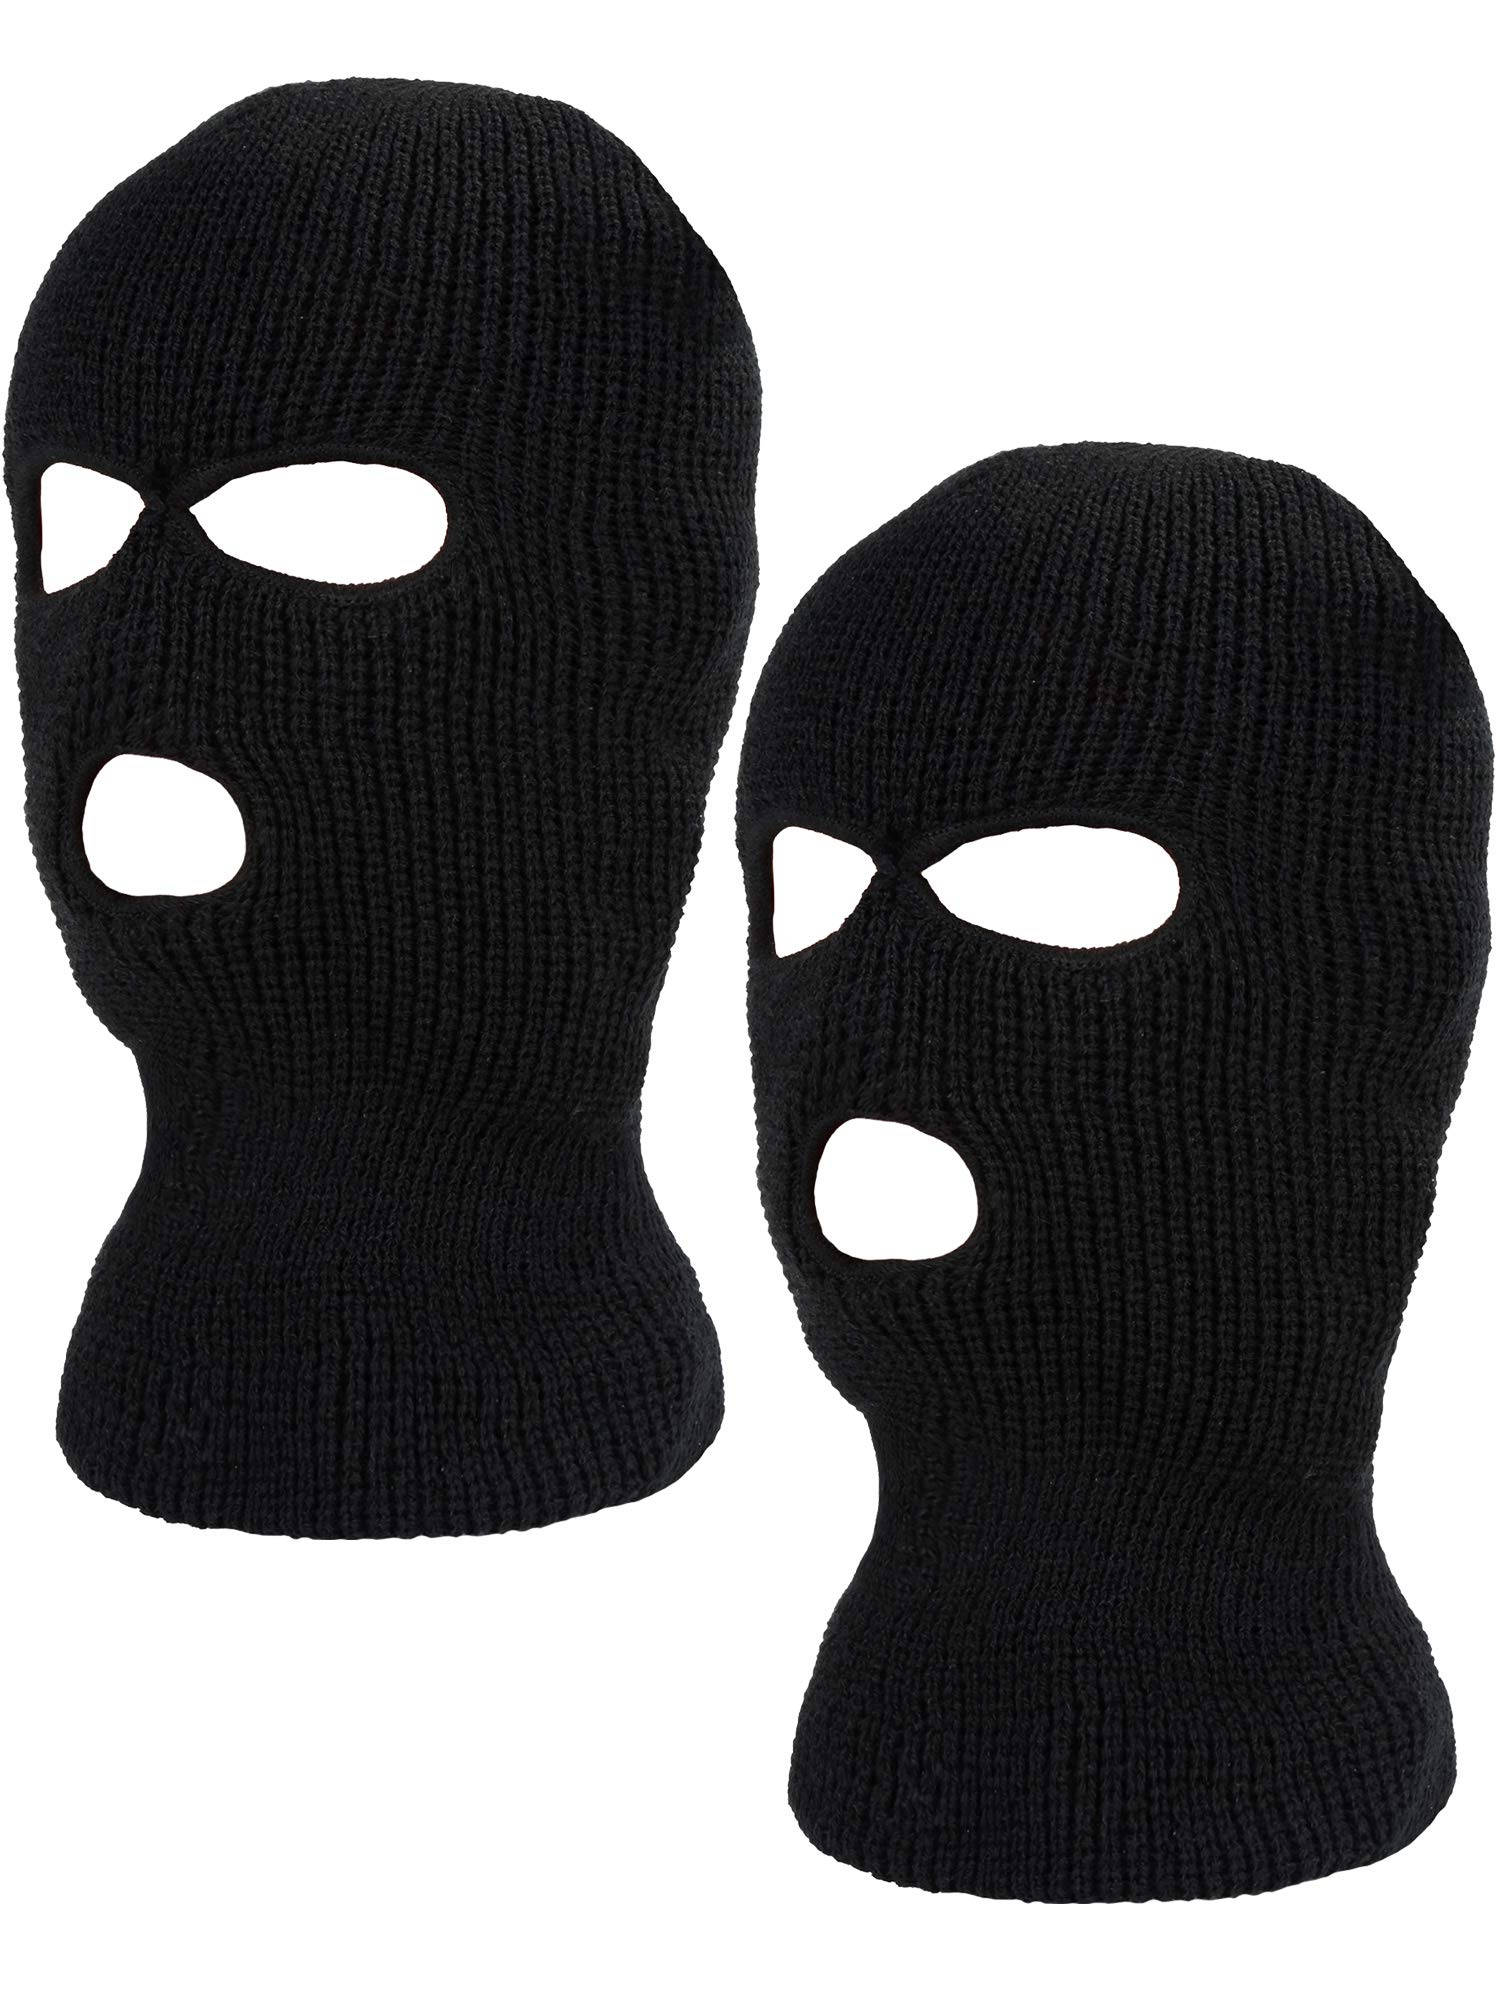 Download Two Black Knitted Ski Masks On A White Background Wallpaper ...